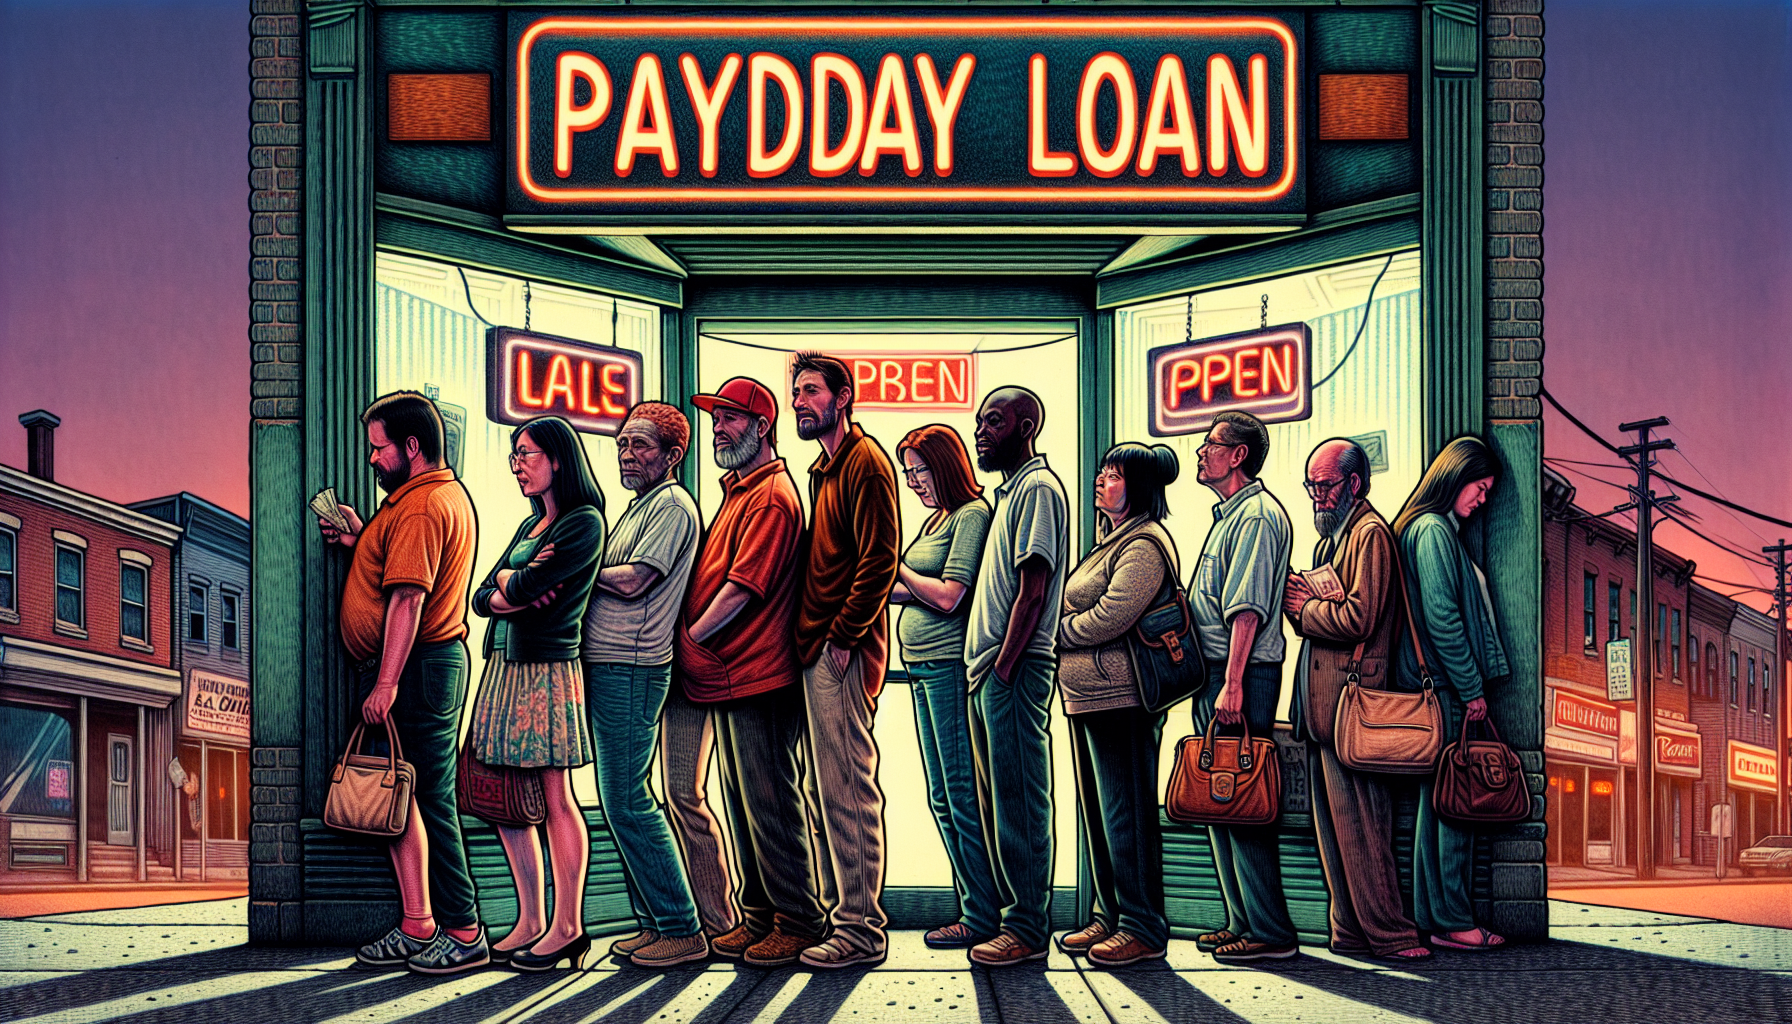 Illustration of a payday loan store with people waiting in line